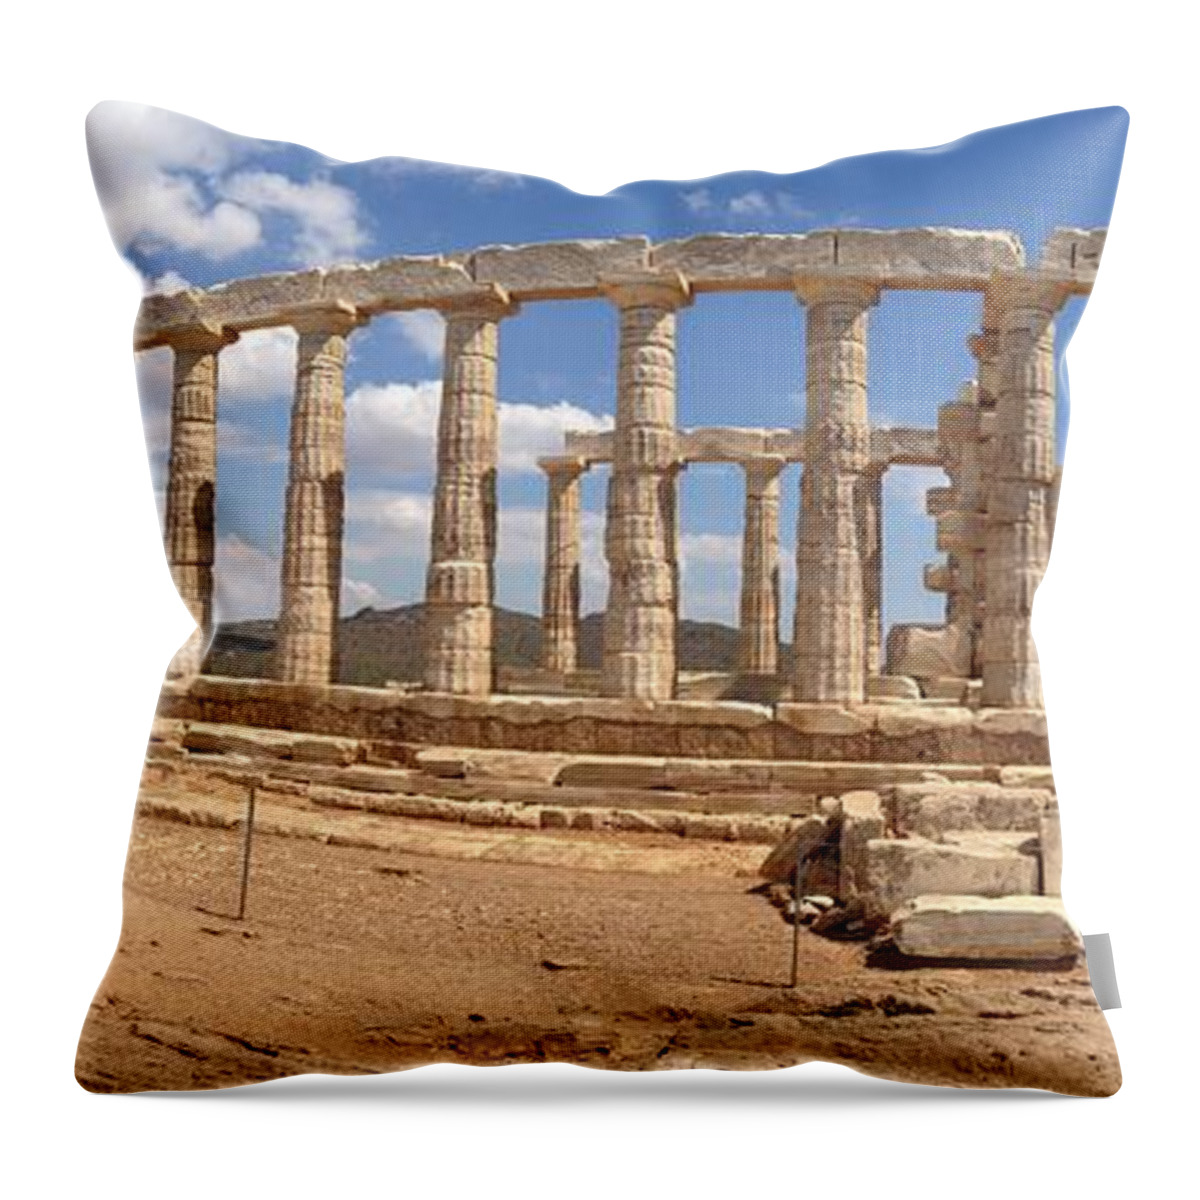 Temple Of Poseidon Throw Pillow featuring the photograph Panoramic Of The Temple Of Poseidon by Denise Railey